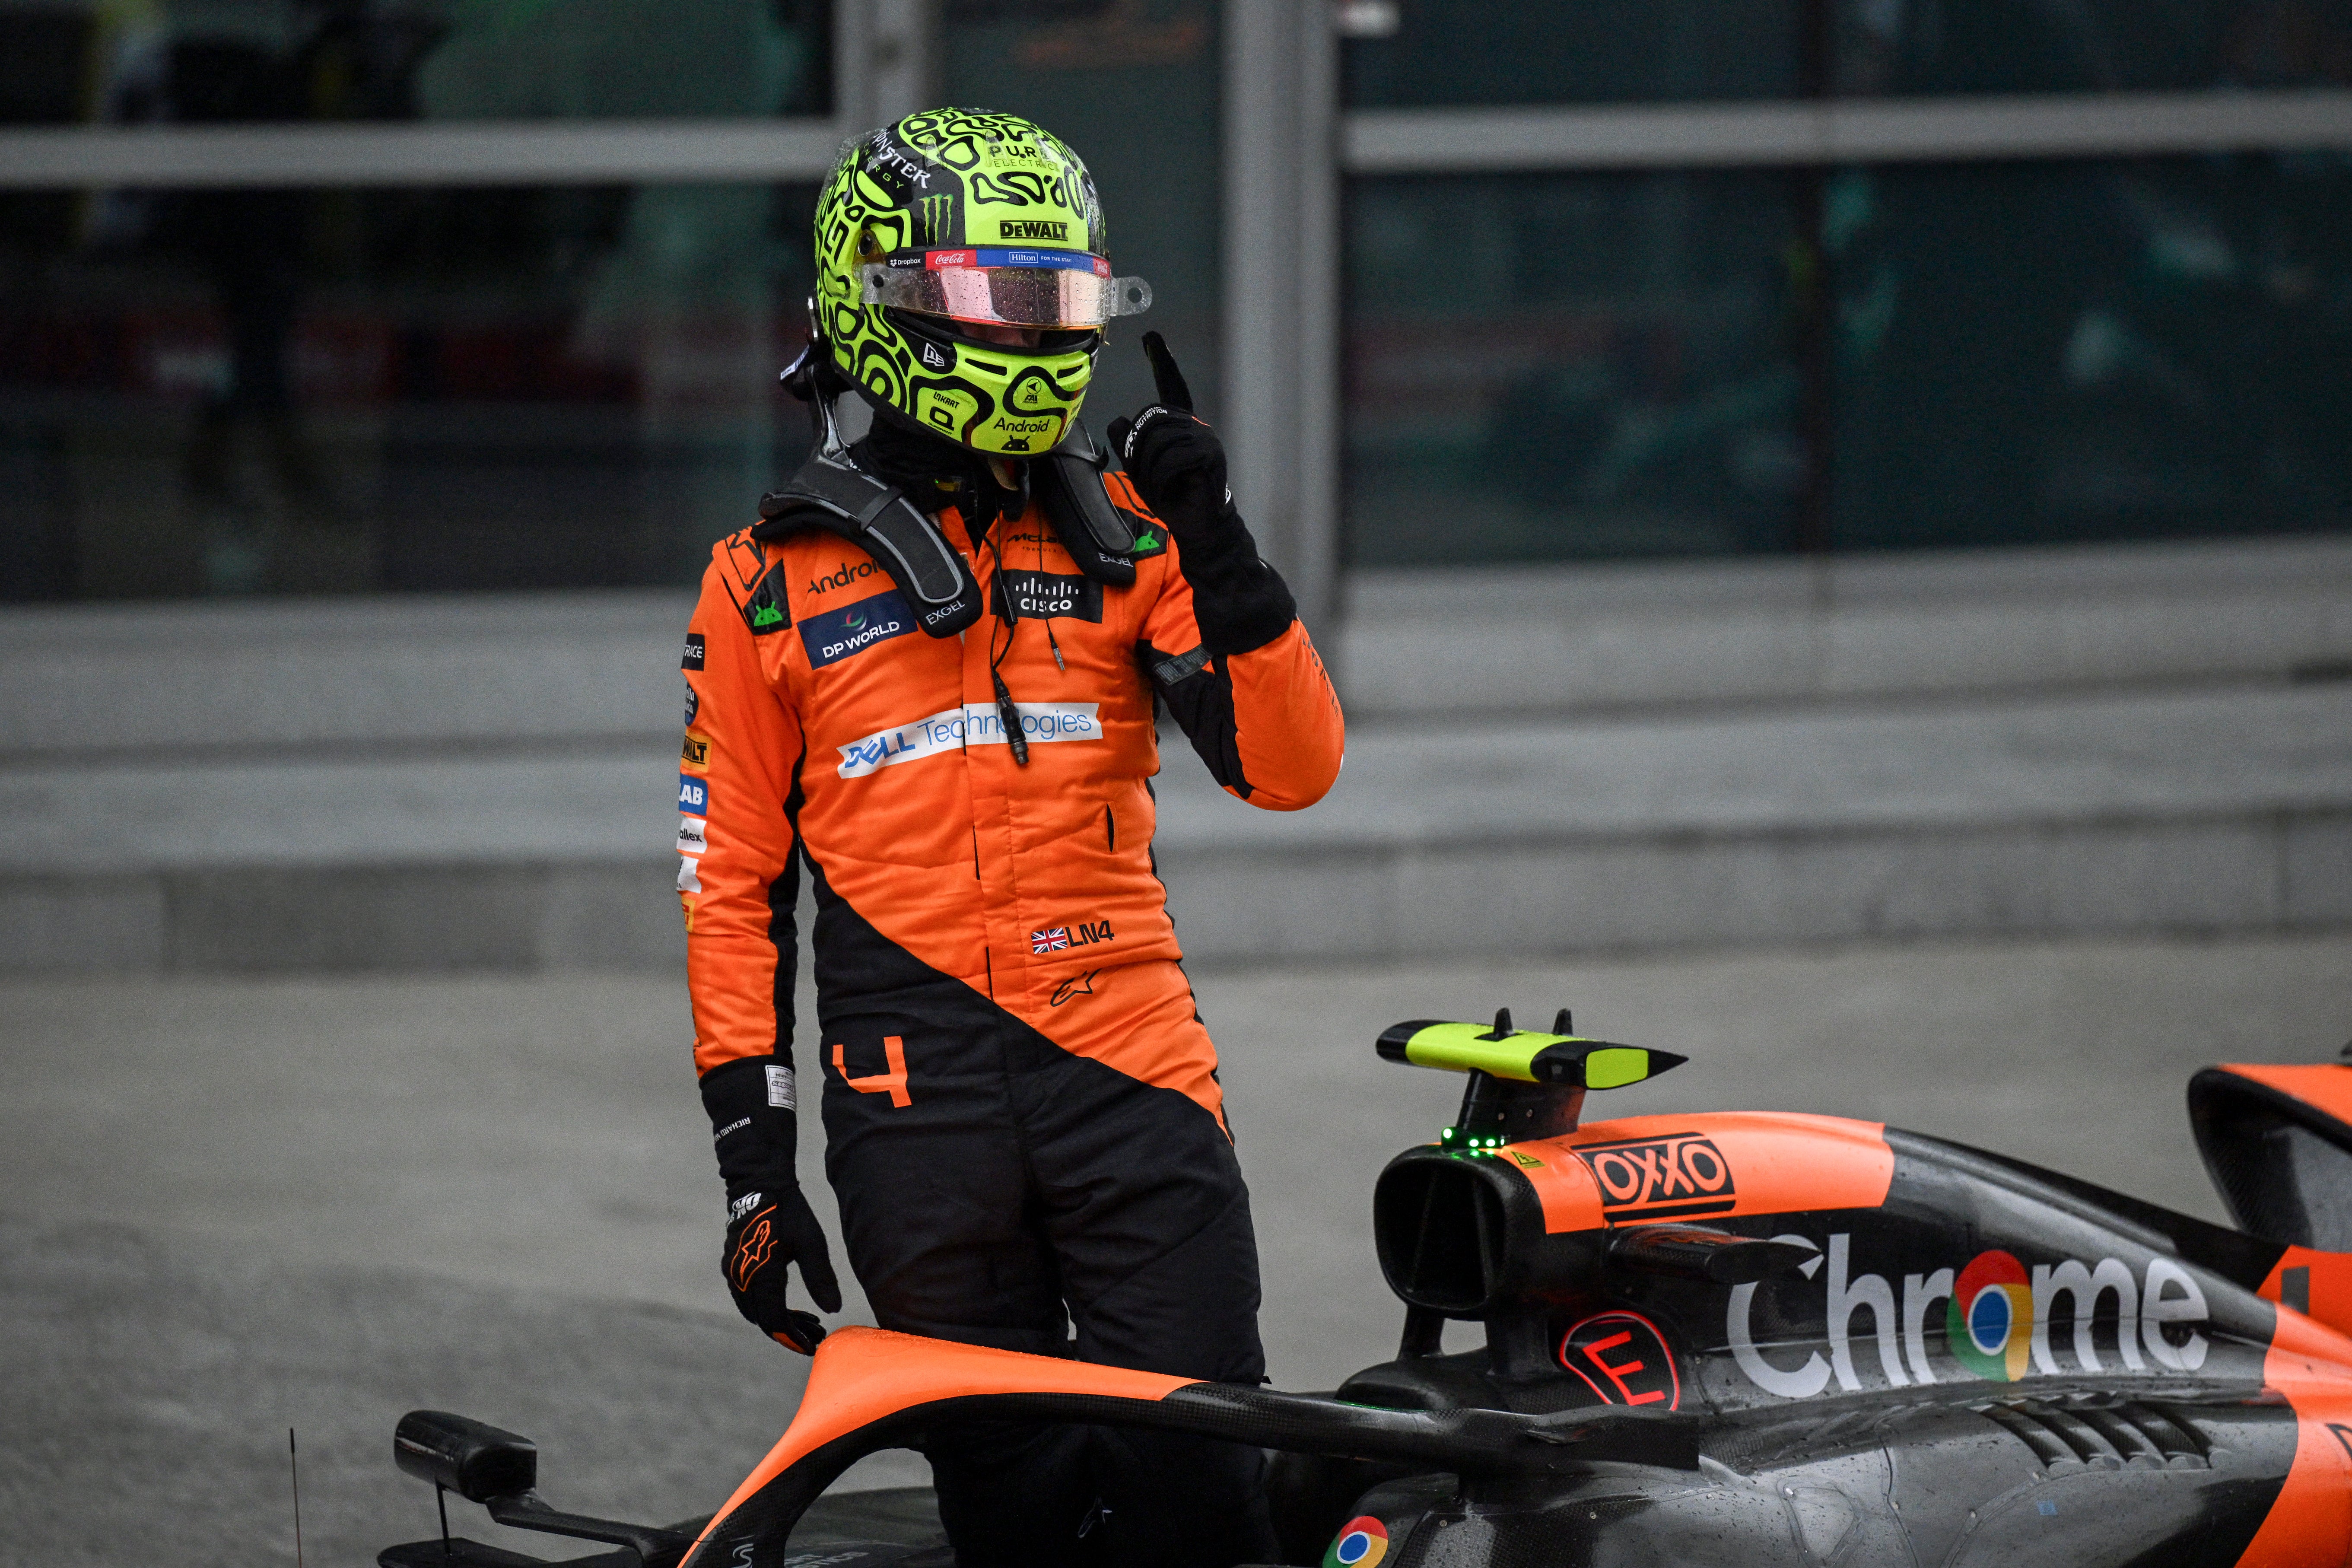 Lando Norris finished top of the leaderboard in SQ3 to take pole position for McLaren